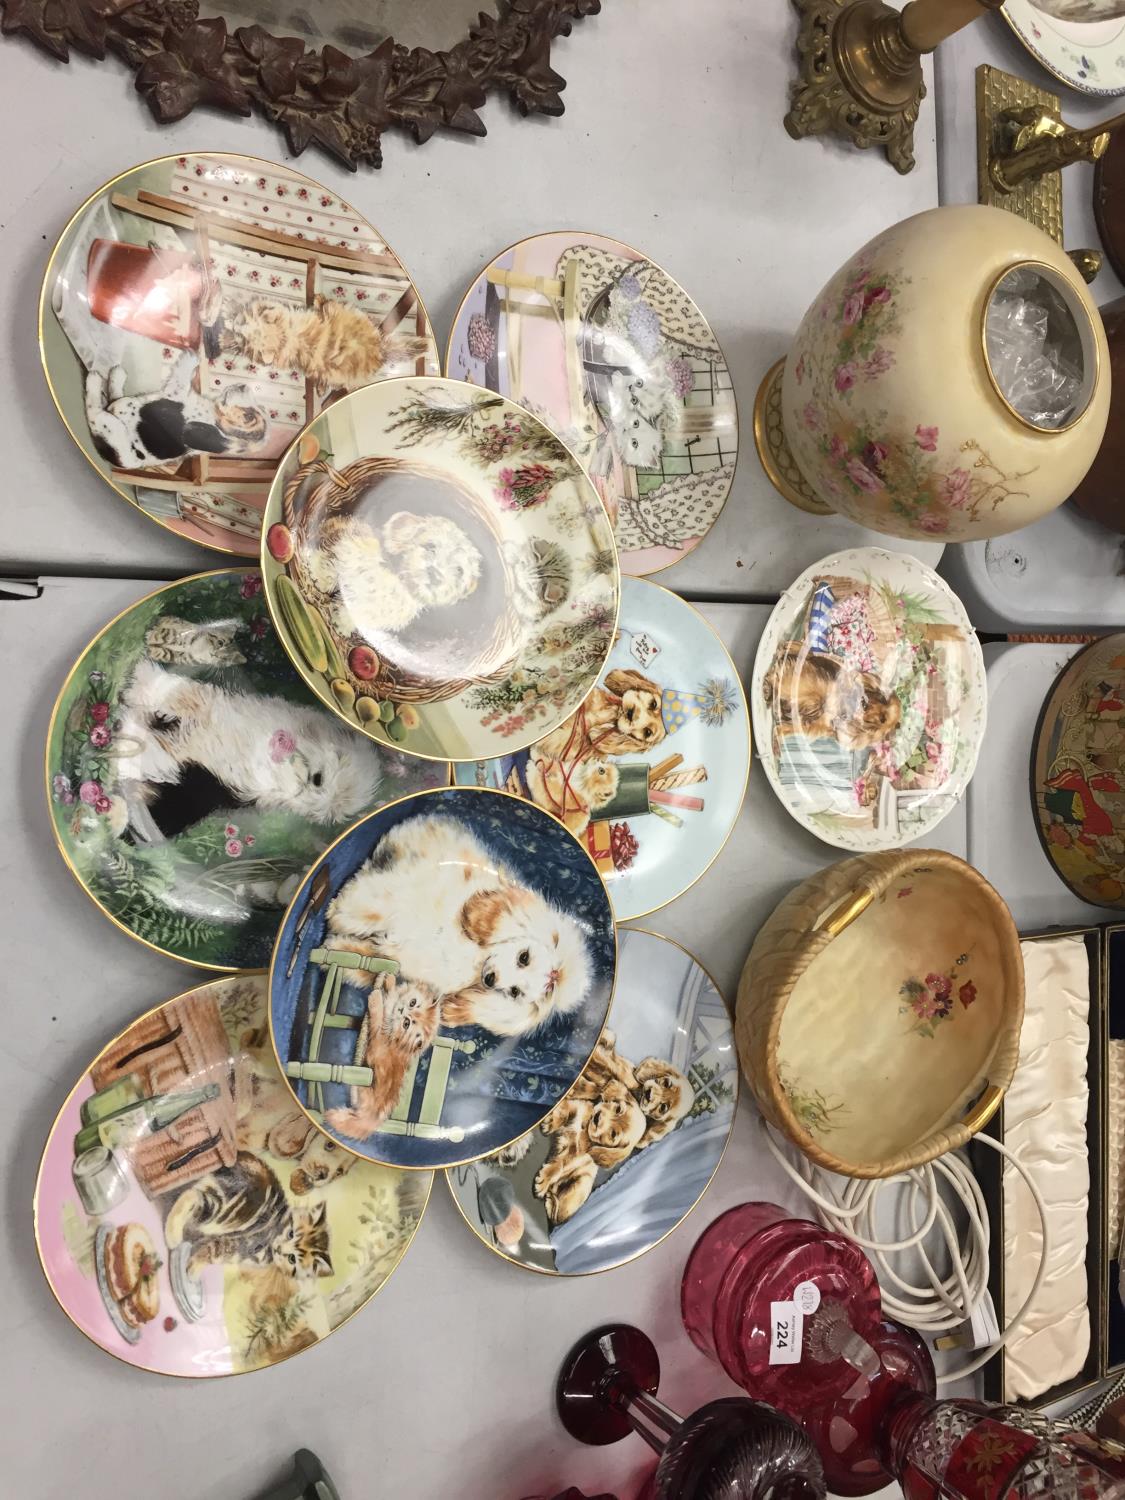 A COLLECTION OF ROYAL WORCESTER PLATES BY PAM COOPER FROM THE MIXED COMPANY PLATE COLLECTION